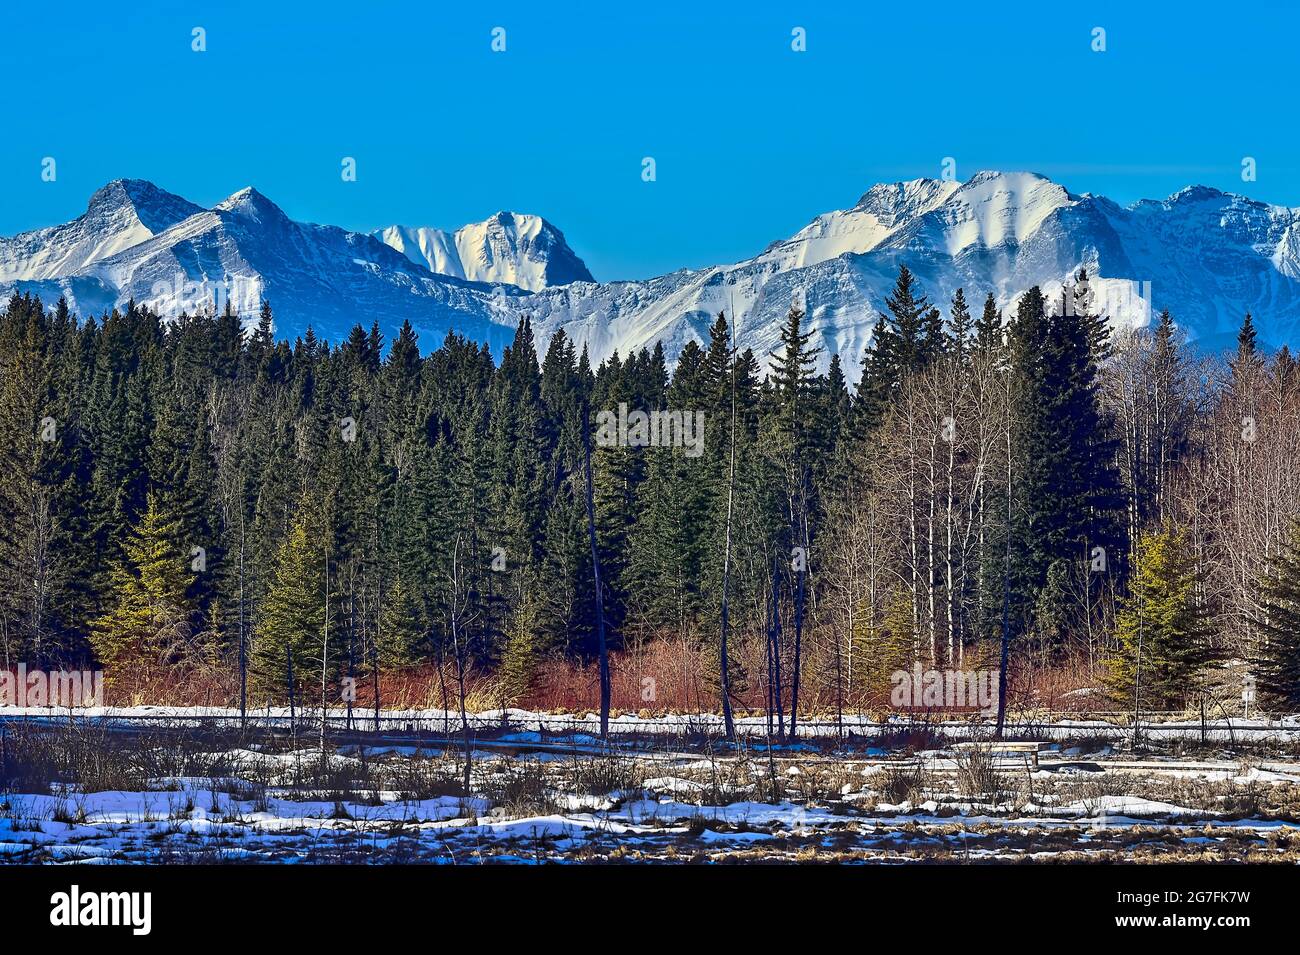 A winter landscape of the snow-capped Rocky Mountains in rural Alberta Canada Stock Photo